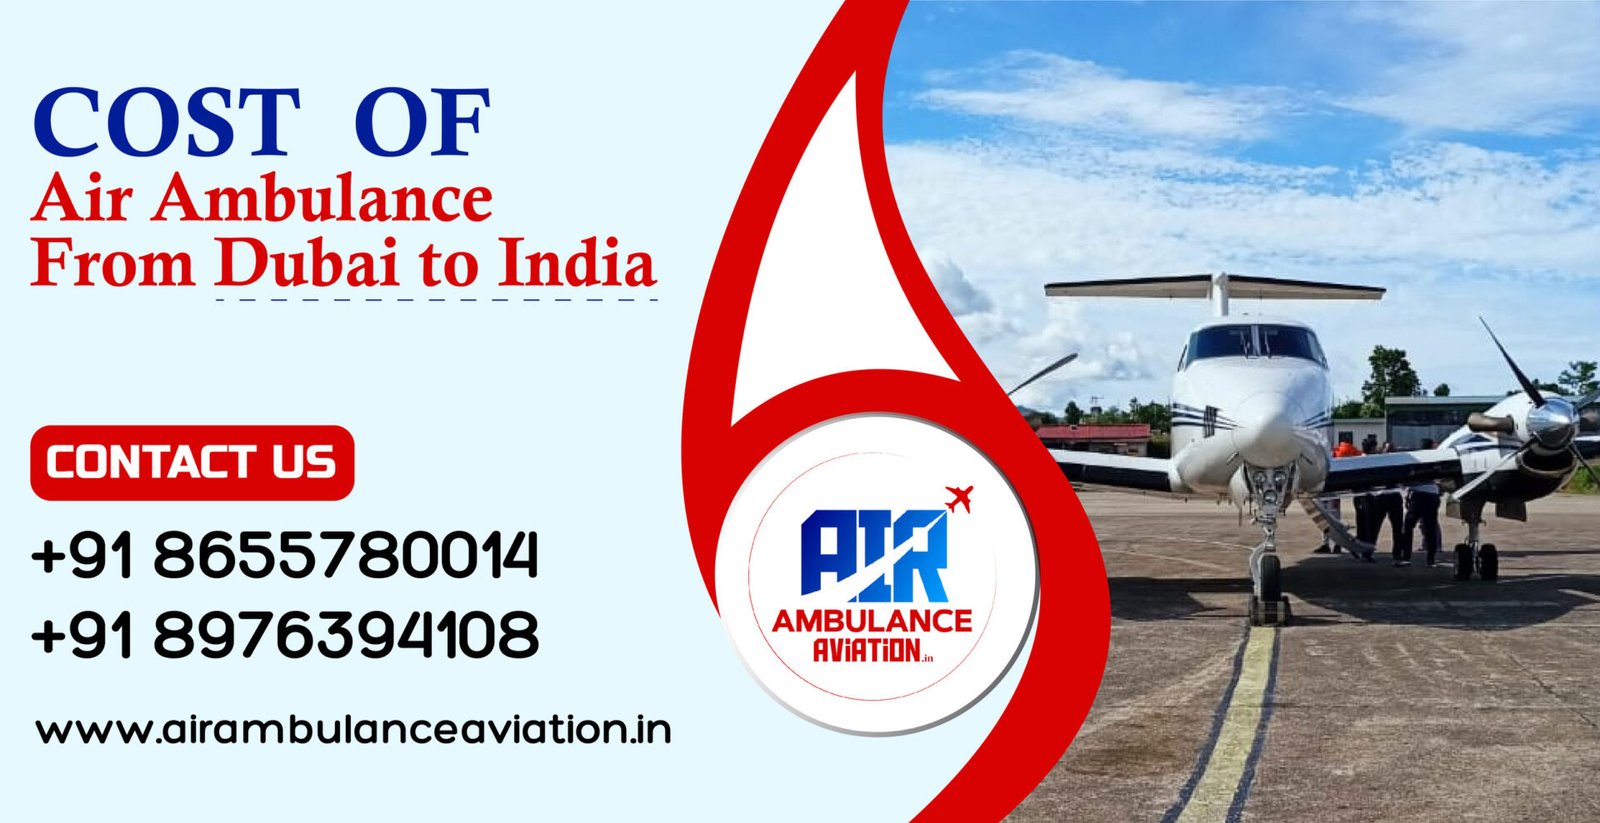 Cost of Air Ambulance From Dubai to India